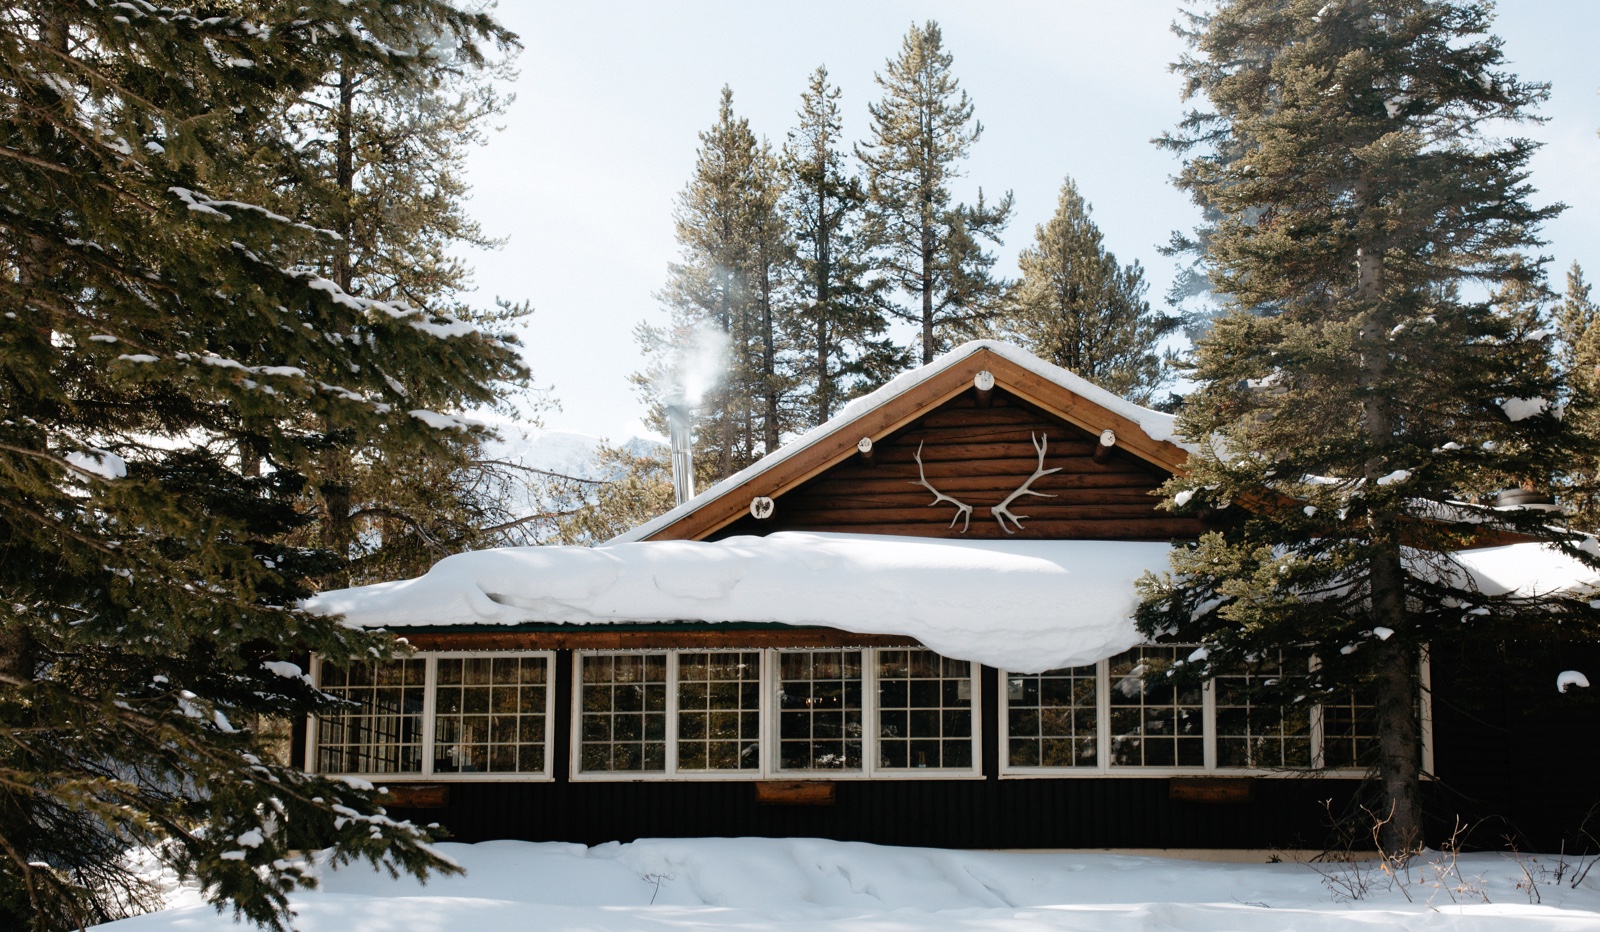 The main lodge at Storm Mountain Lodge in winter